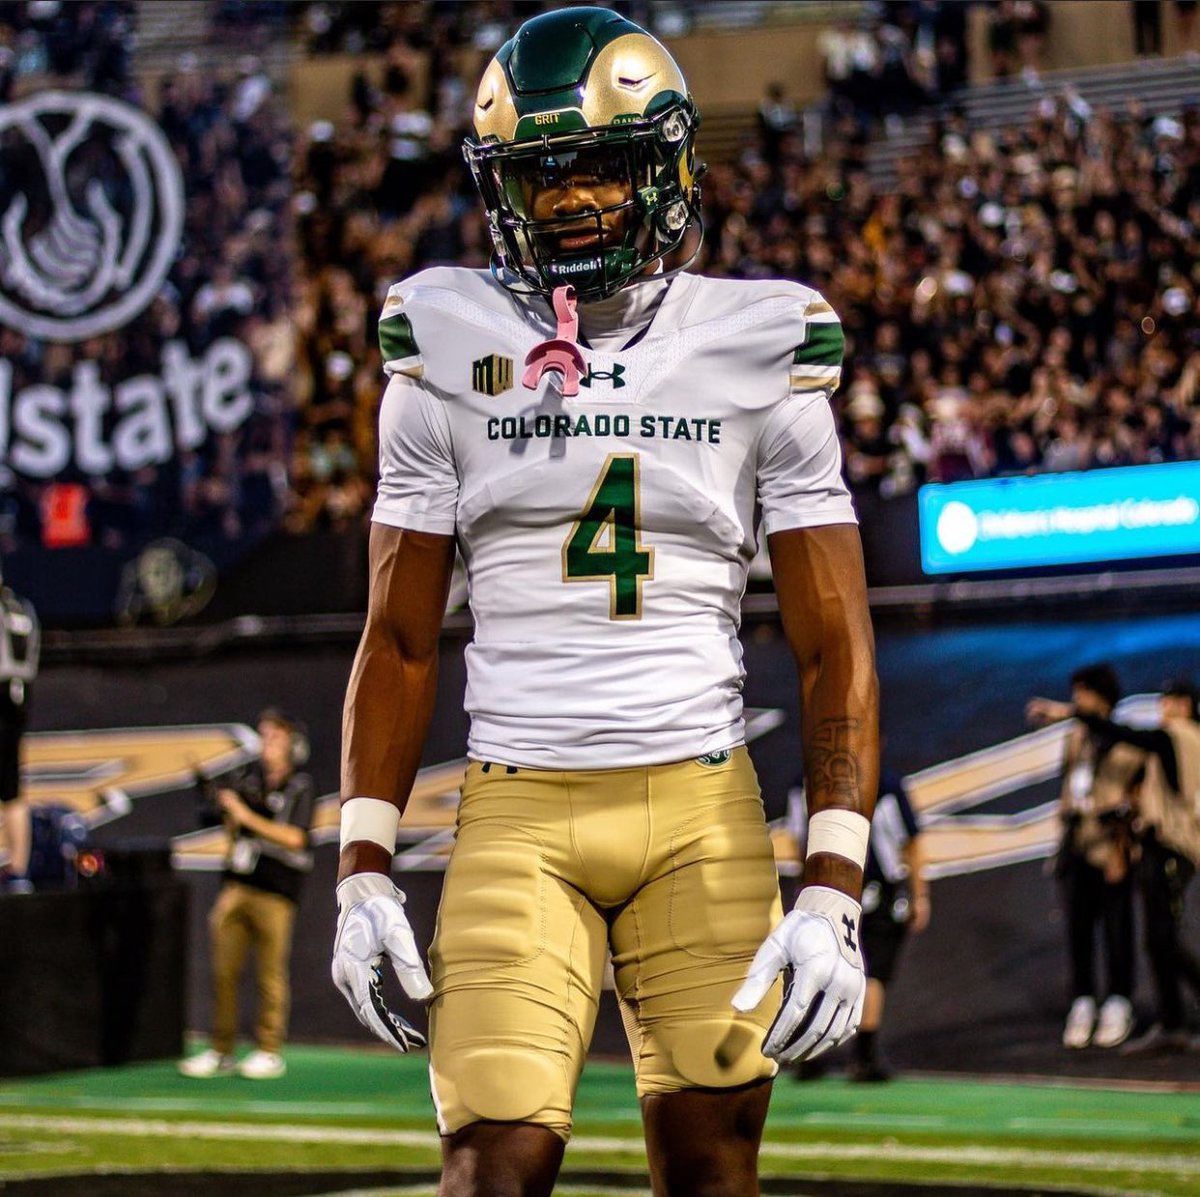 Blessed to receive an offer from Colorado State University🏈!